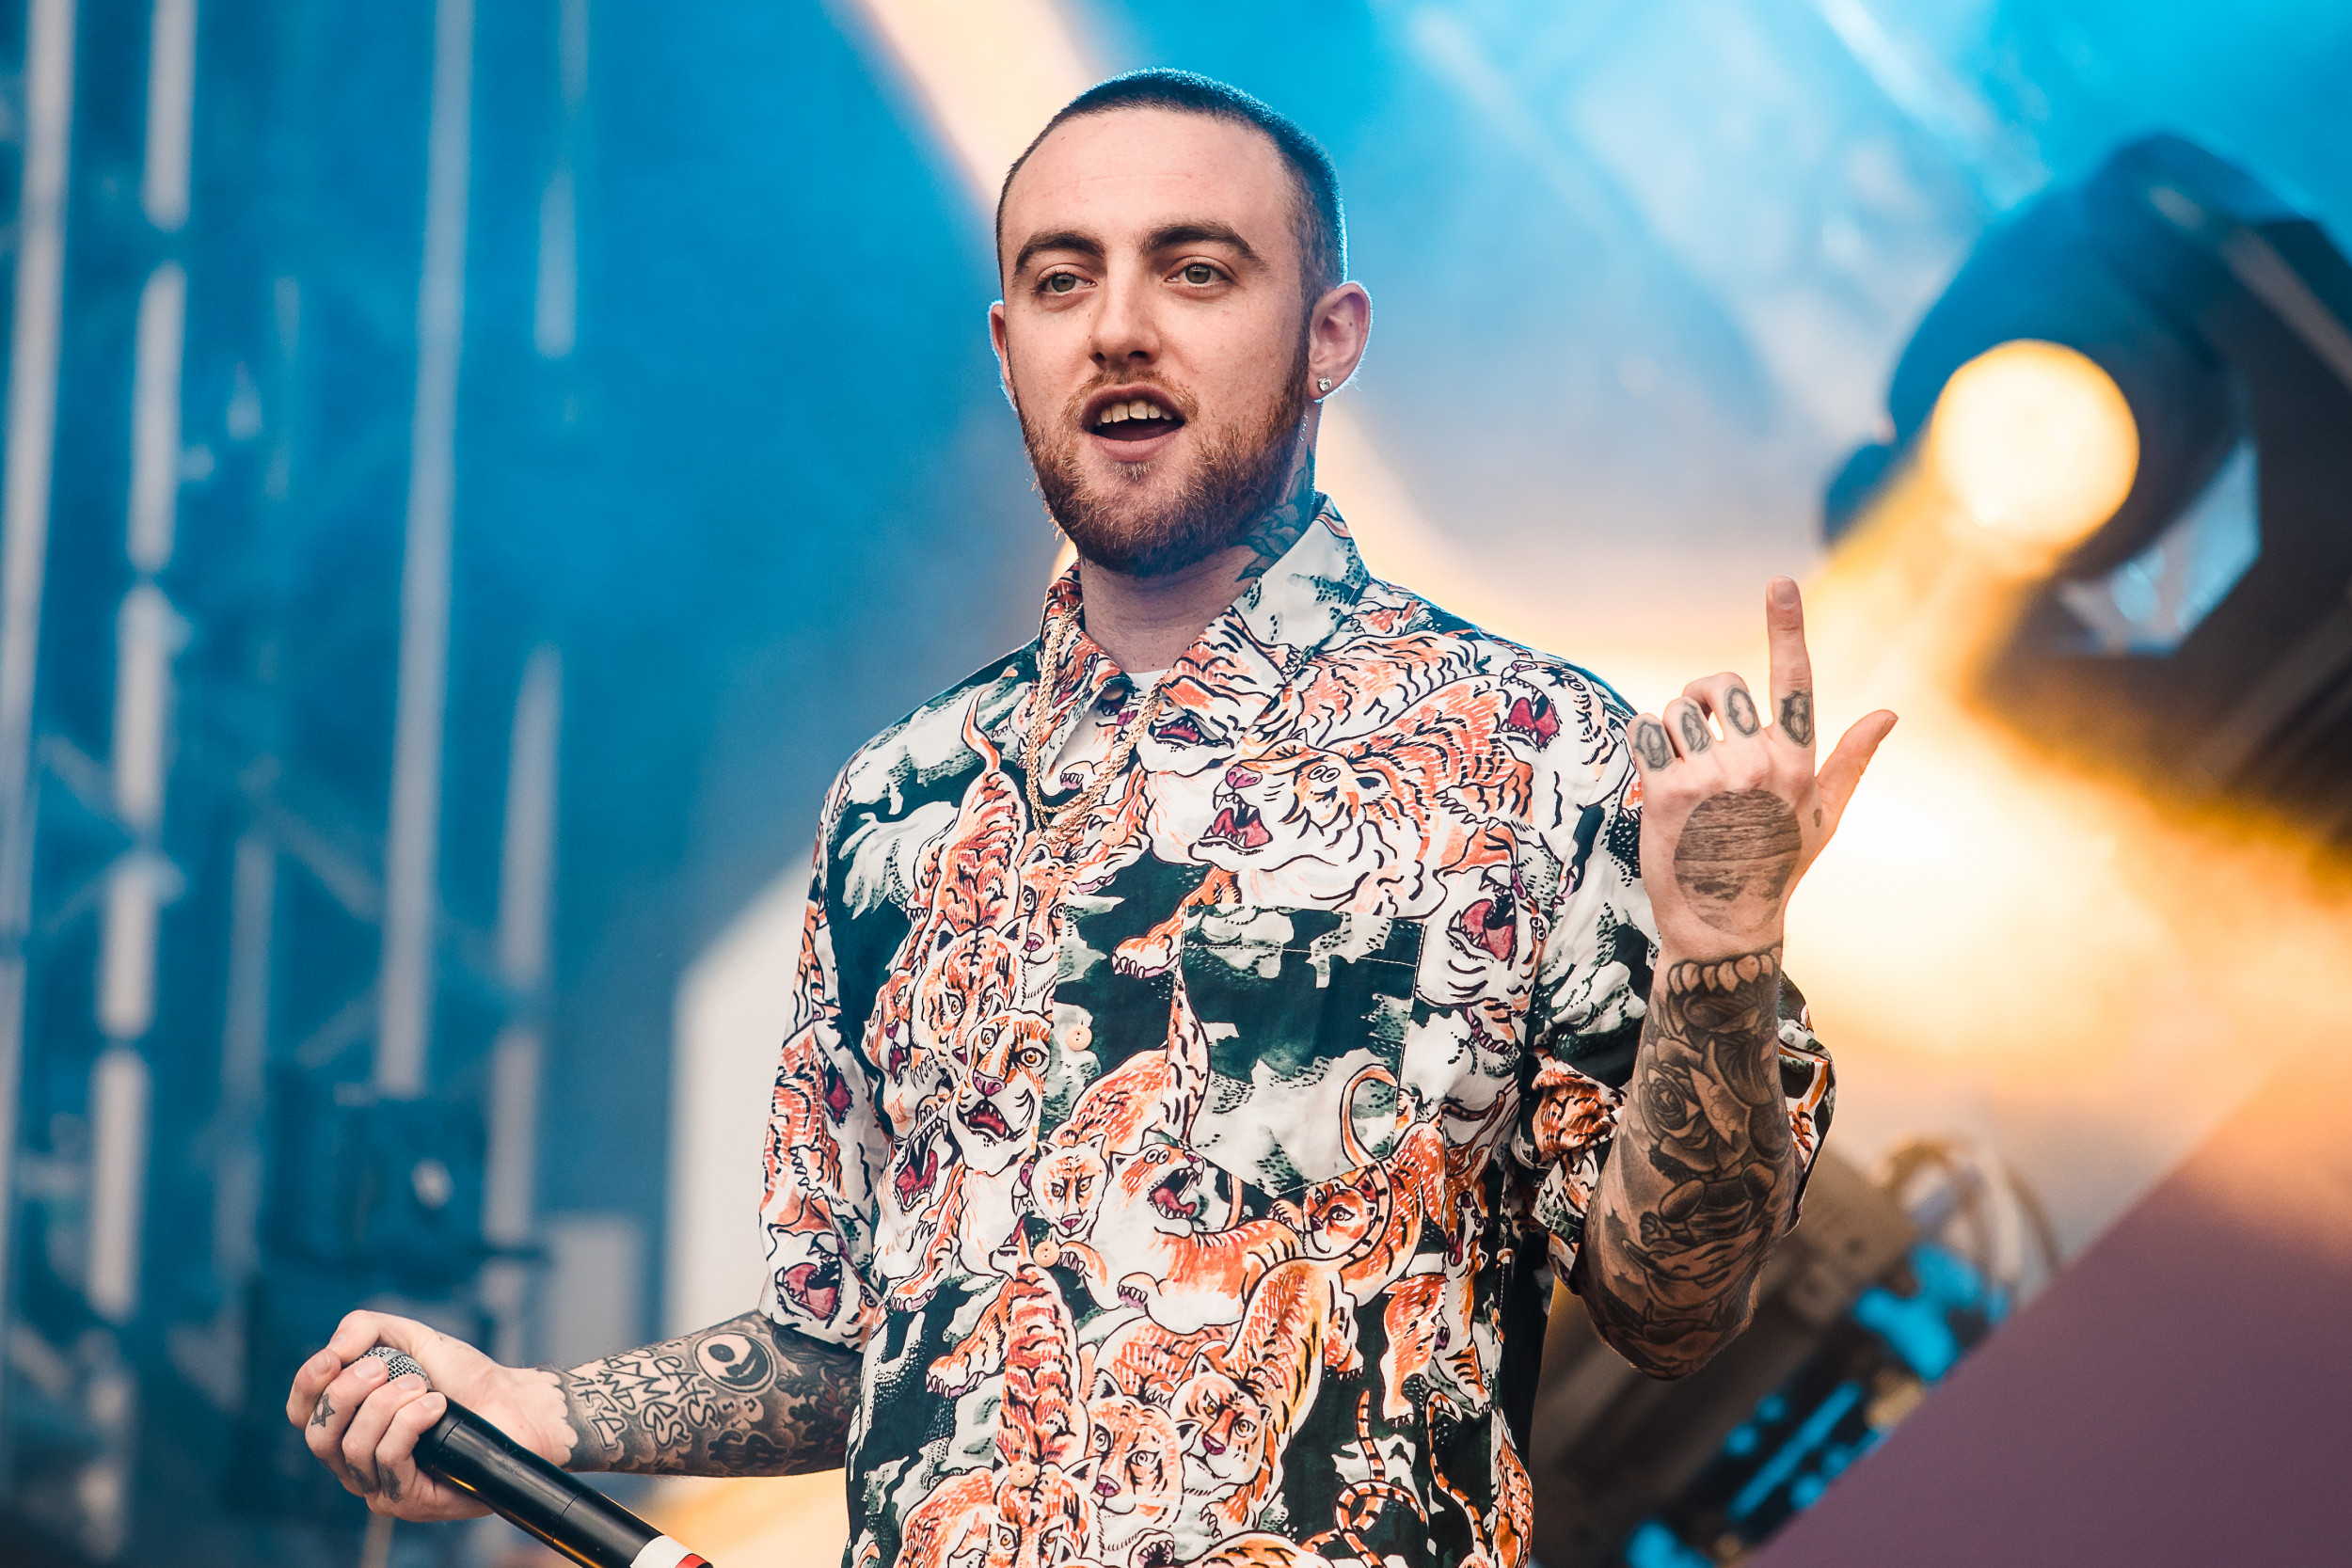 Stream Free Music from Albums by Mac Miller